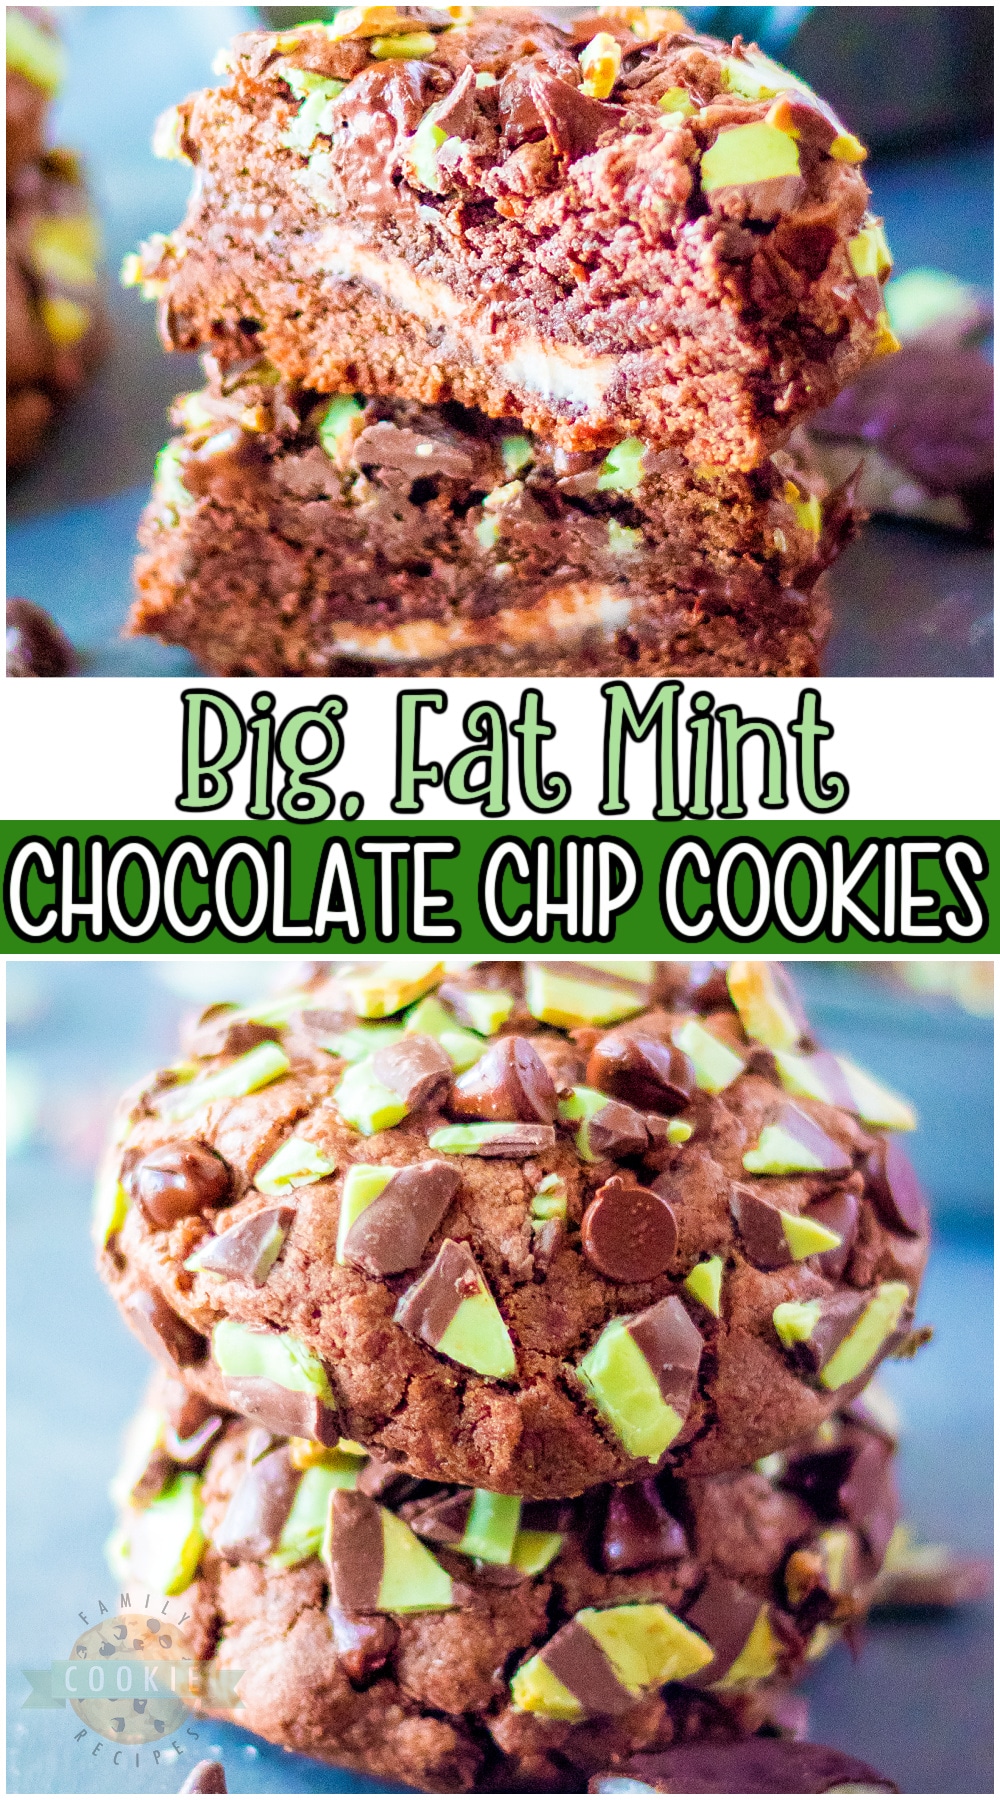 Big, Fat Mint Chocolate Chip Cookies are an indulgent blend of chocolate mint in an oversized cookie! Over the top cookies with mint chips, chocolate chips & a mint patty inside! #mint #chocolate #cookies #baking #dessert #easyrecipe from FAMILY COOKIE RECIPES via @buttergirls